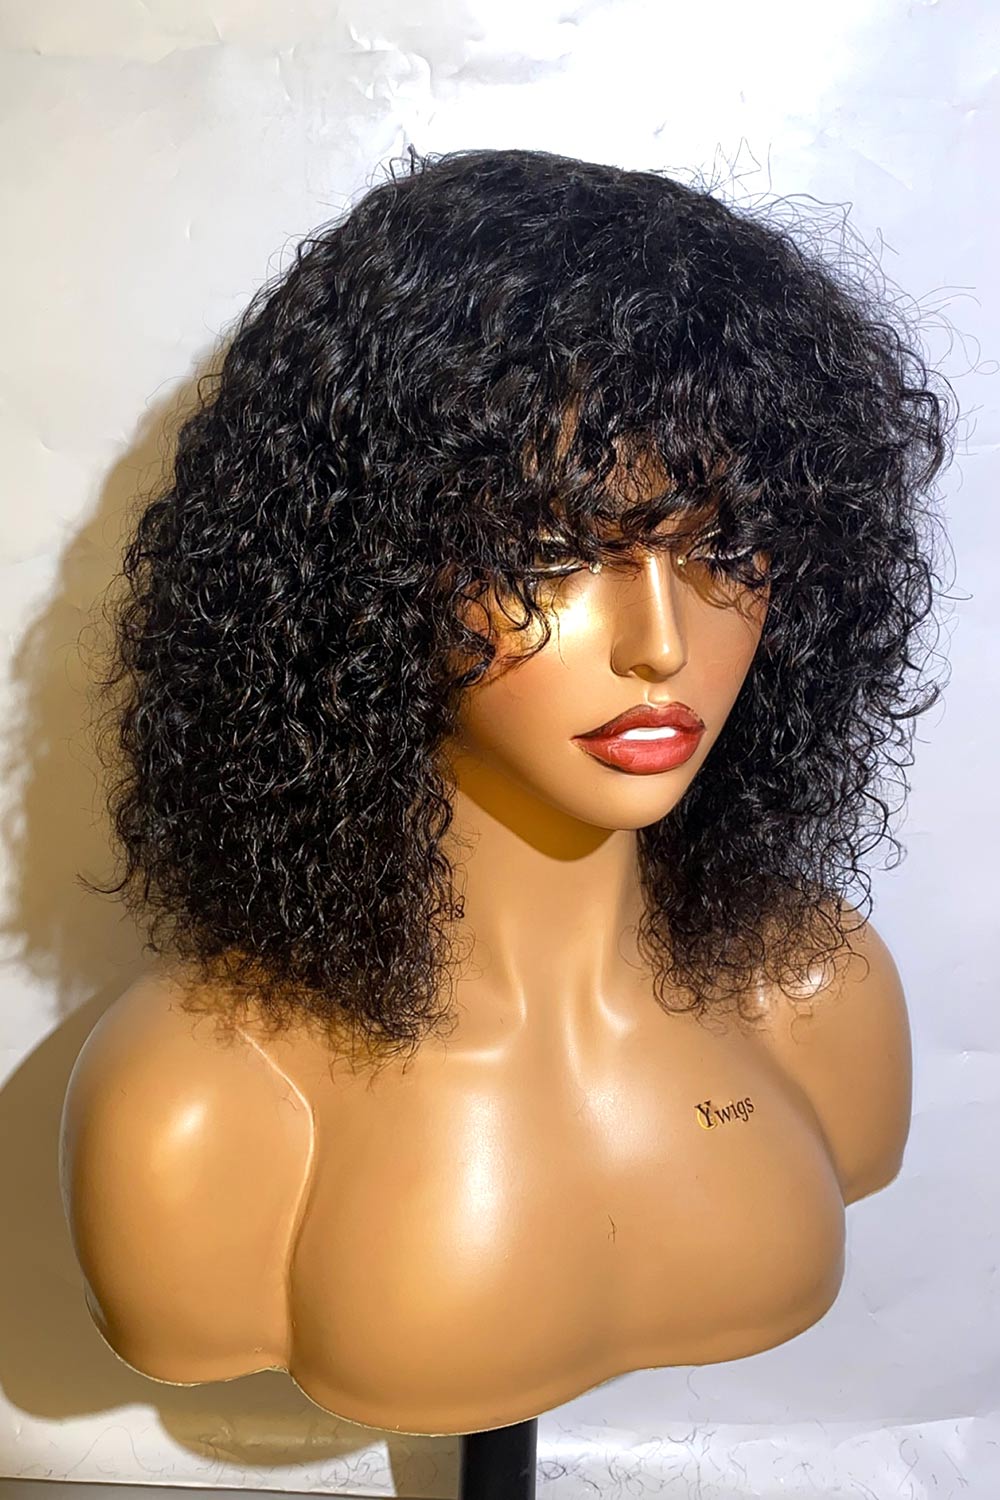 Designer Wigs-Super Easy Curly Wig With Bangs 12‘’